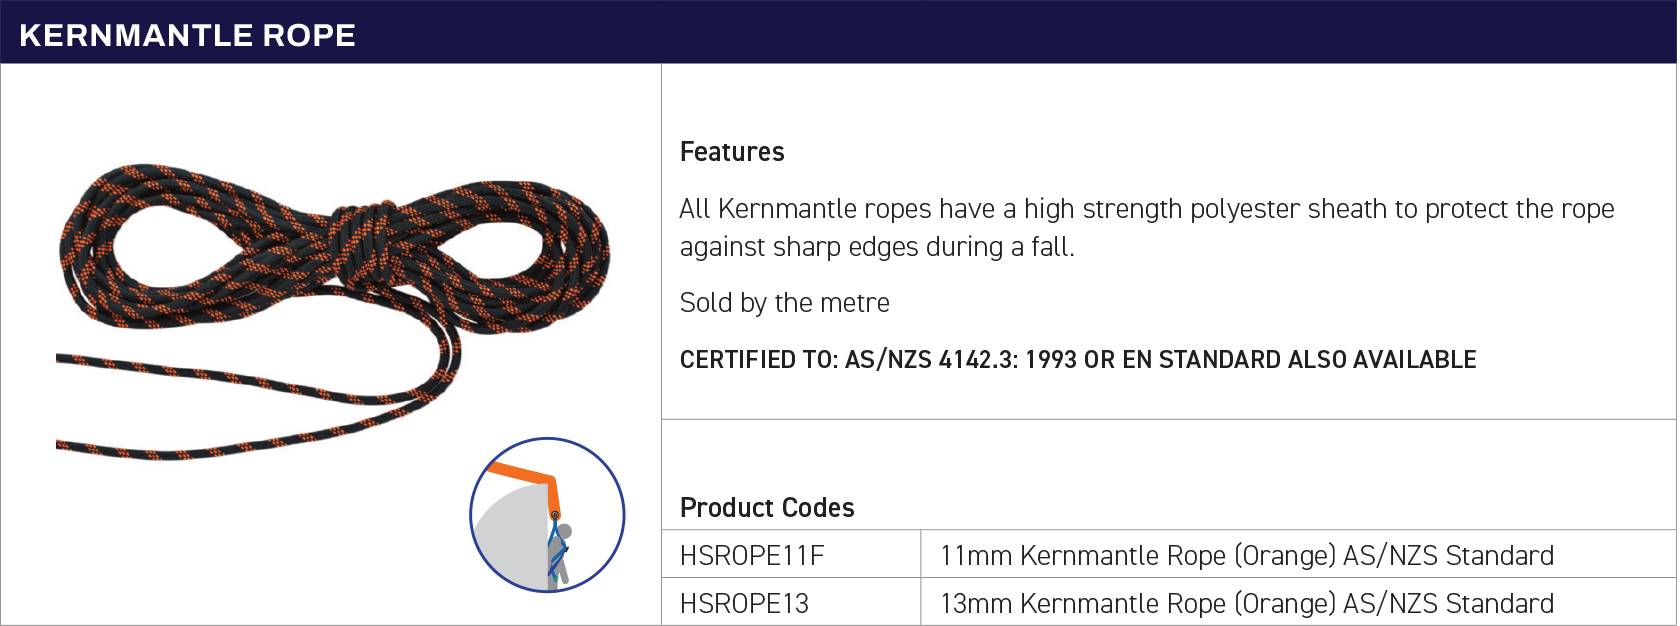 11mm Kernmantle Rope  Chain & Rigging Supplies